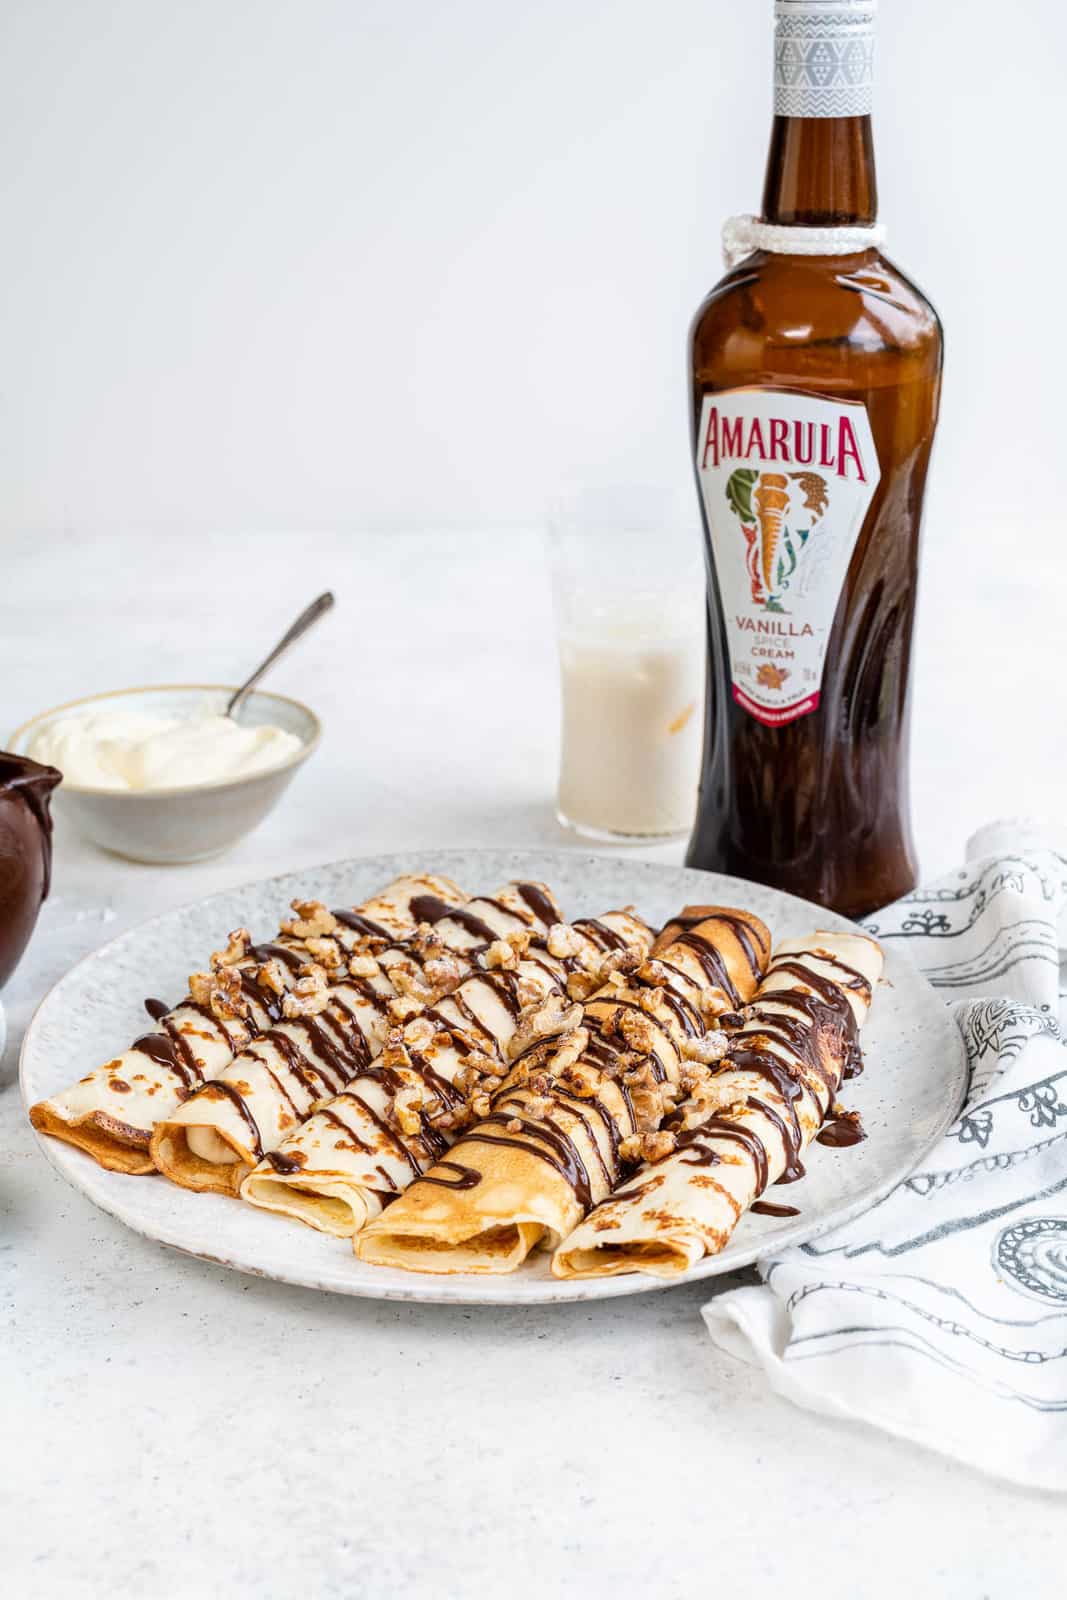 Sweet crepes filled with cream and drizzled with chocolate sauce and chopped nuts